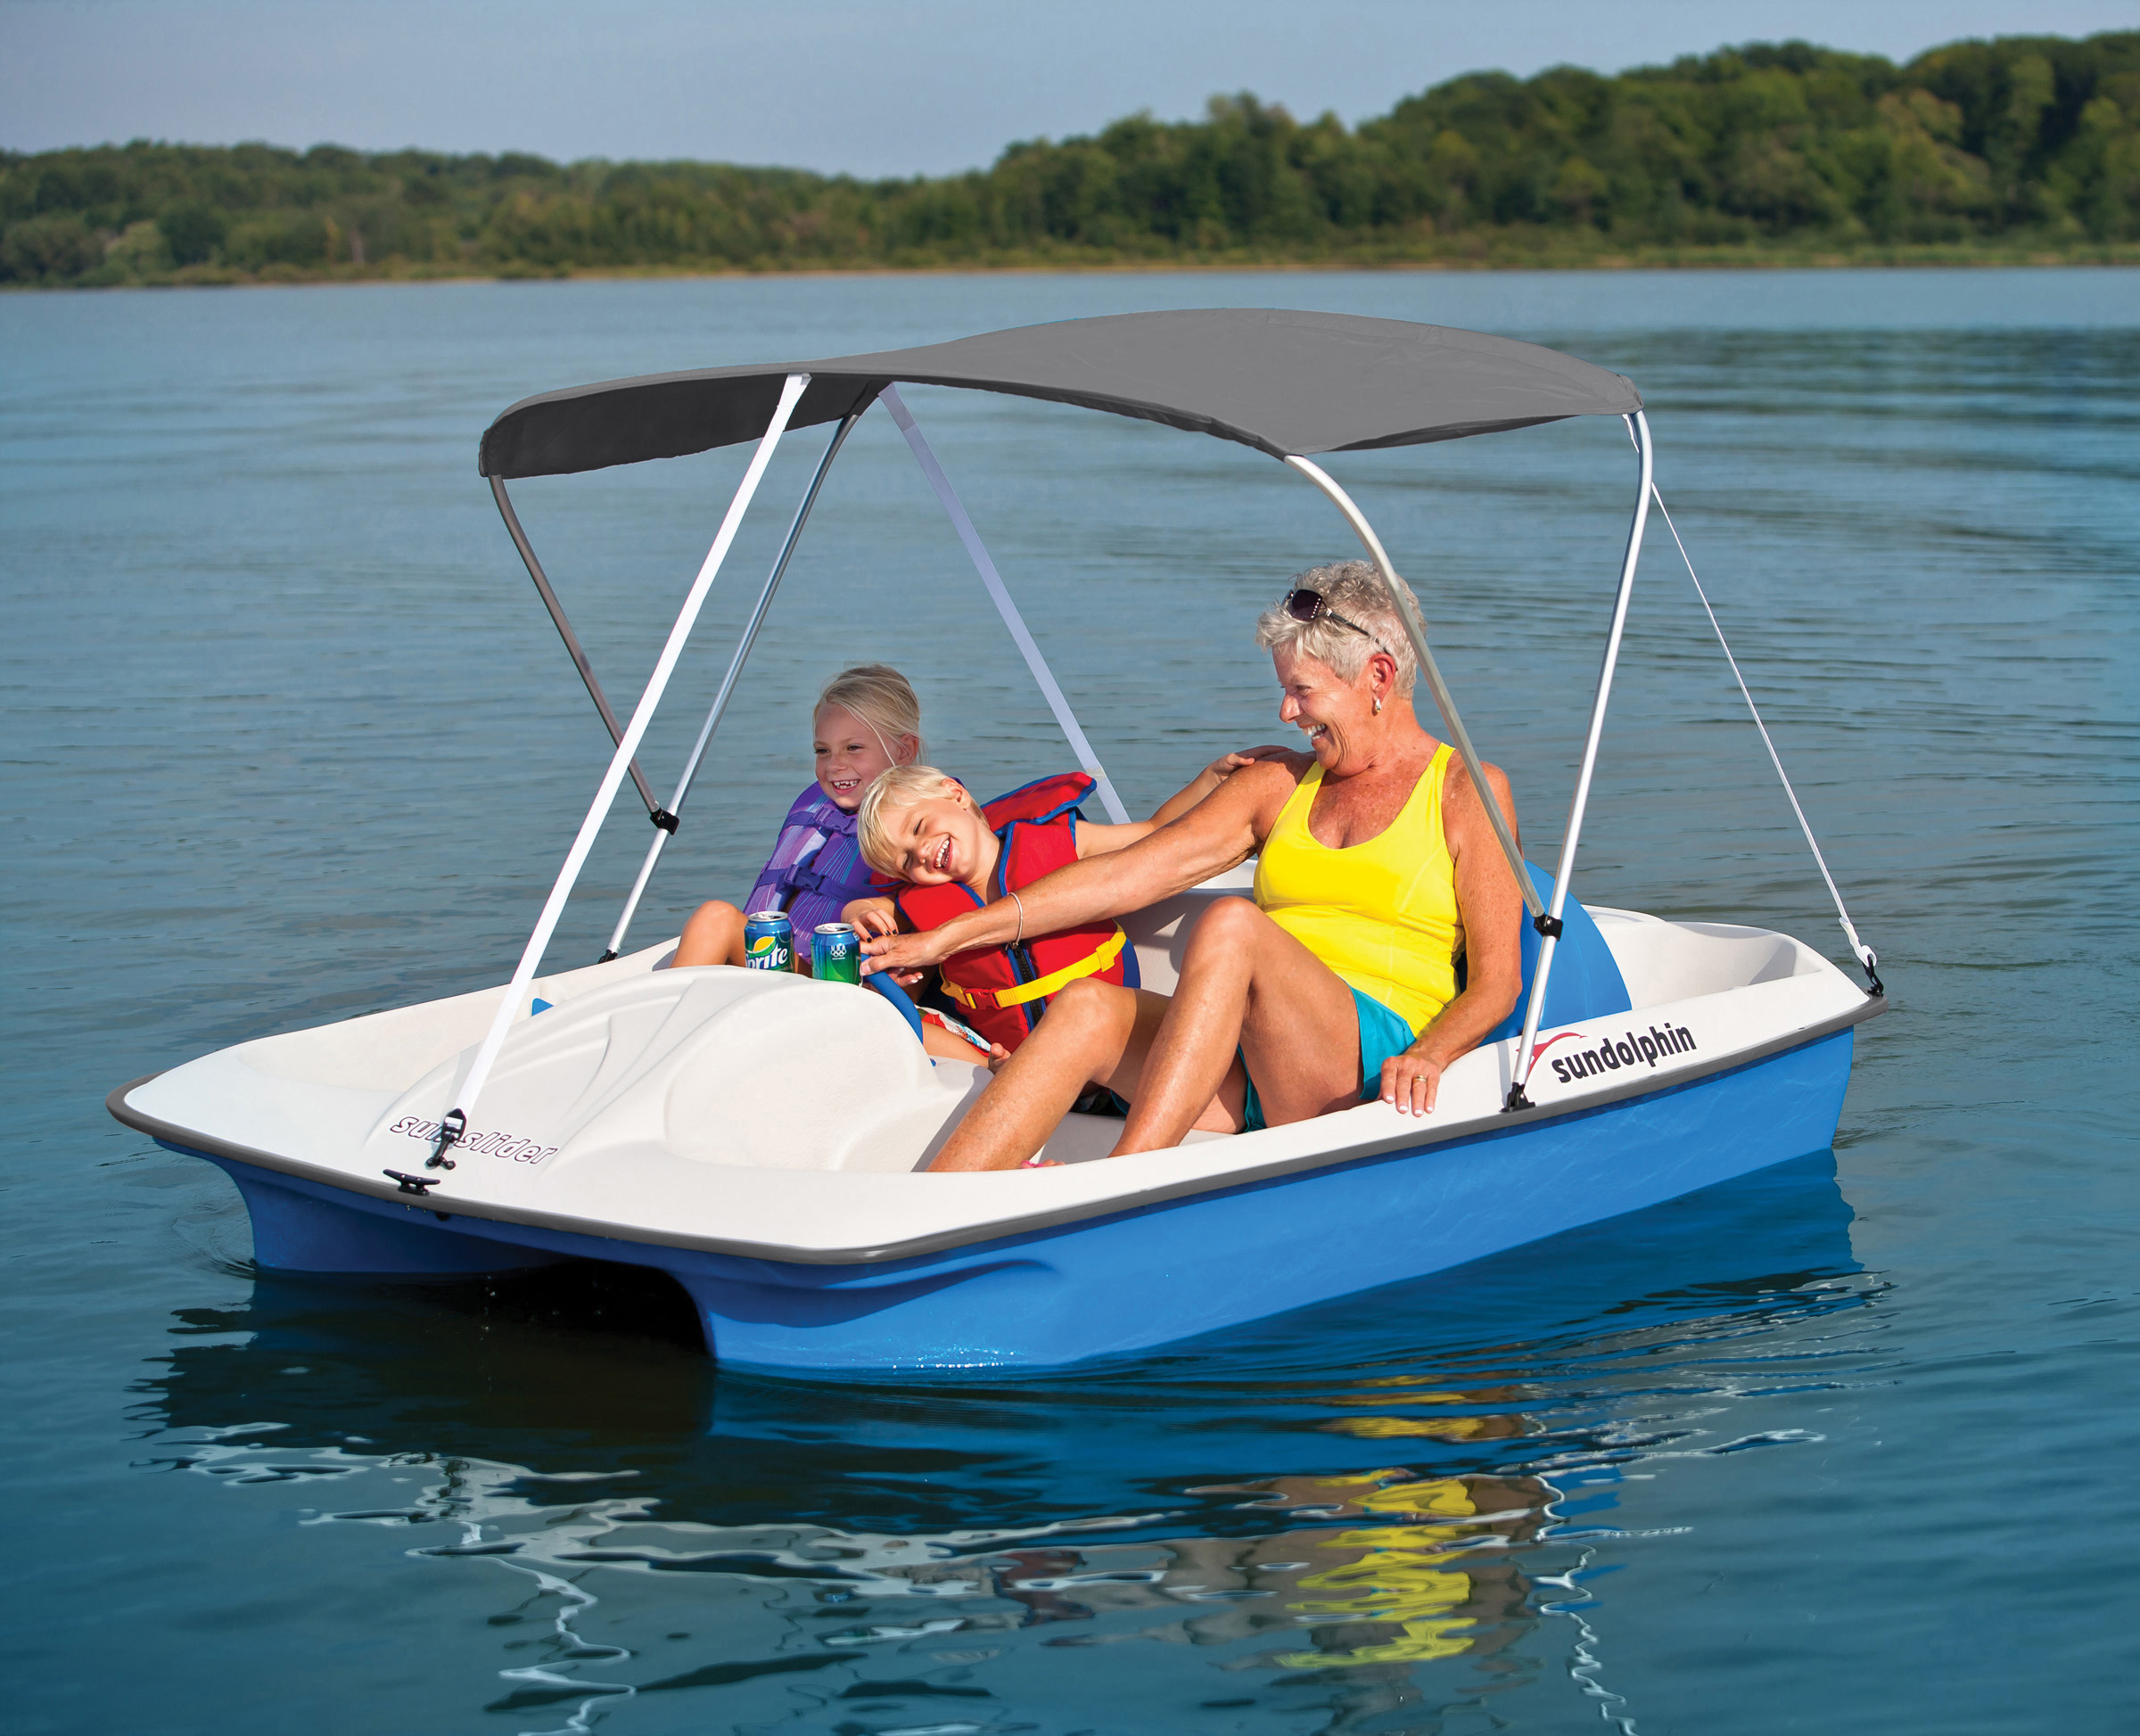 Sun Dolphin 5 Seat Sun Slider Pedal Boat with Canopy, Blue - image 4 of 6